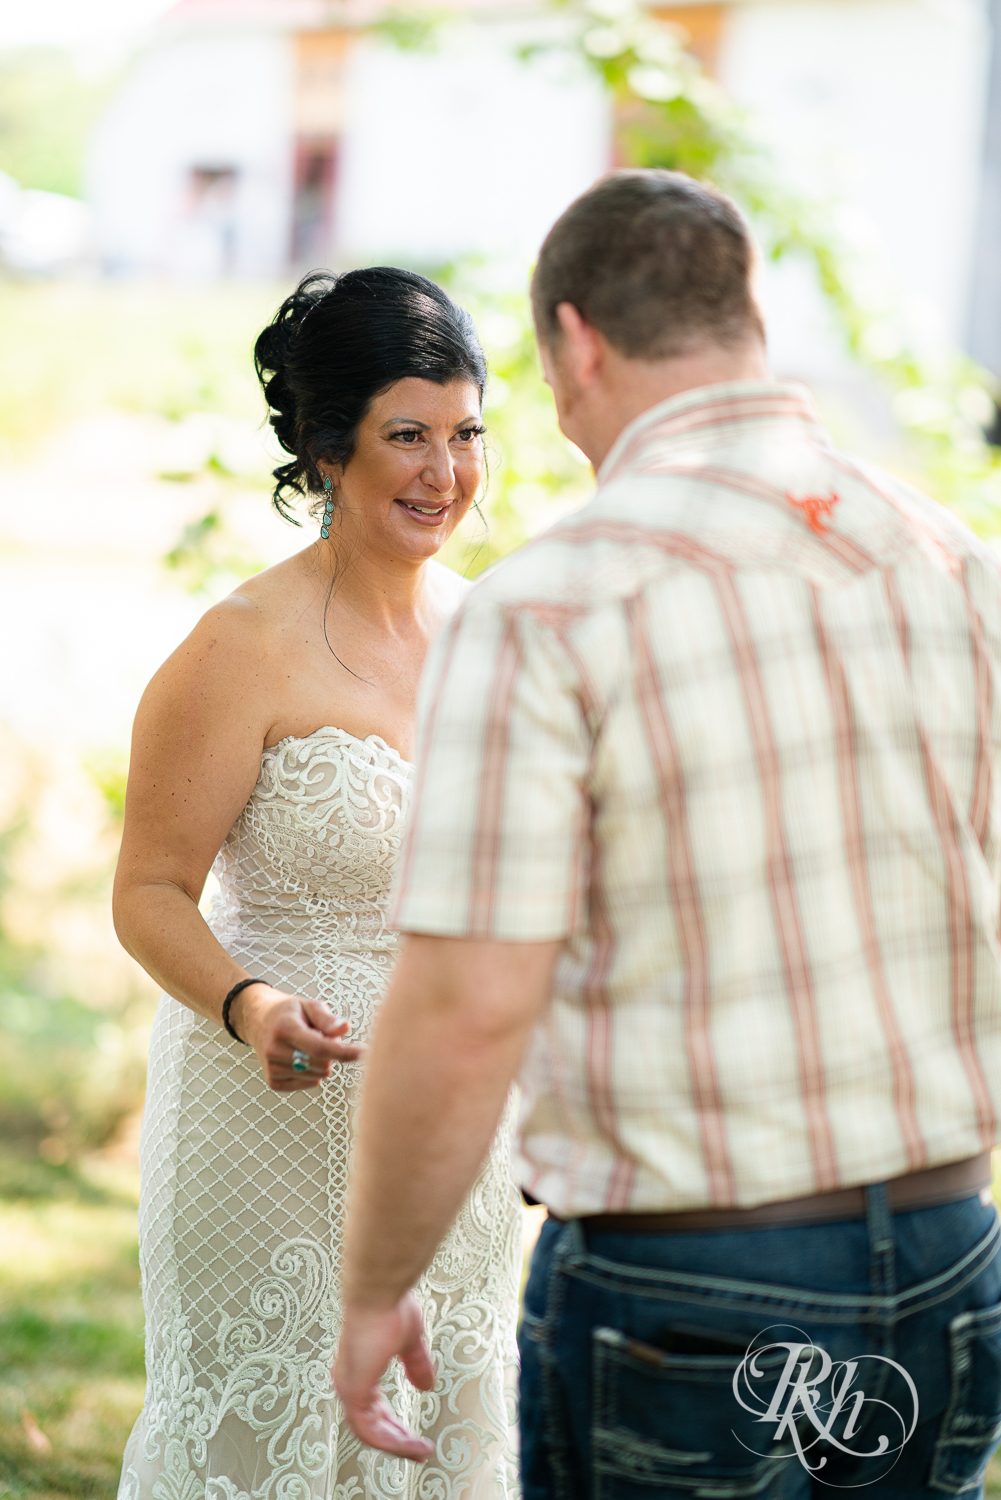 Bride and groom share first look at Croix View Farm in Osceola, Wisconsin.